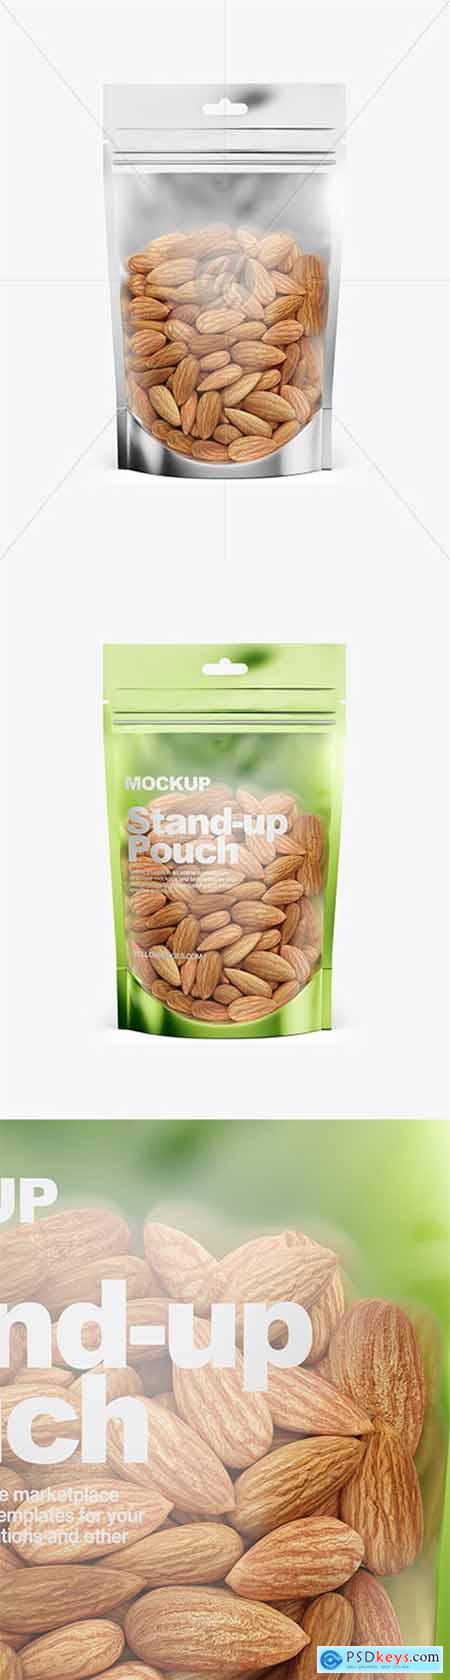 Download Glossy Transparent Stand Up Pouch W Almond Nuts Mockup Front View 33048 Free Download Photoshop Vector Stock Image Via Torrent Zippyshare From Psdkeys Com